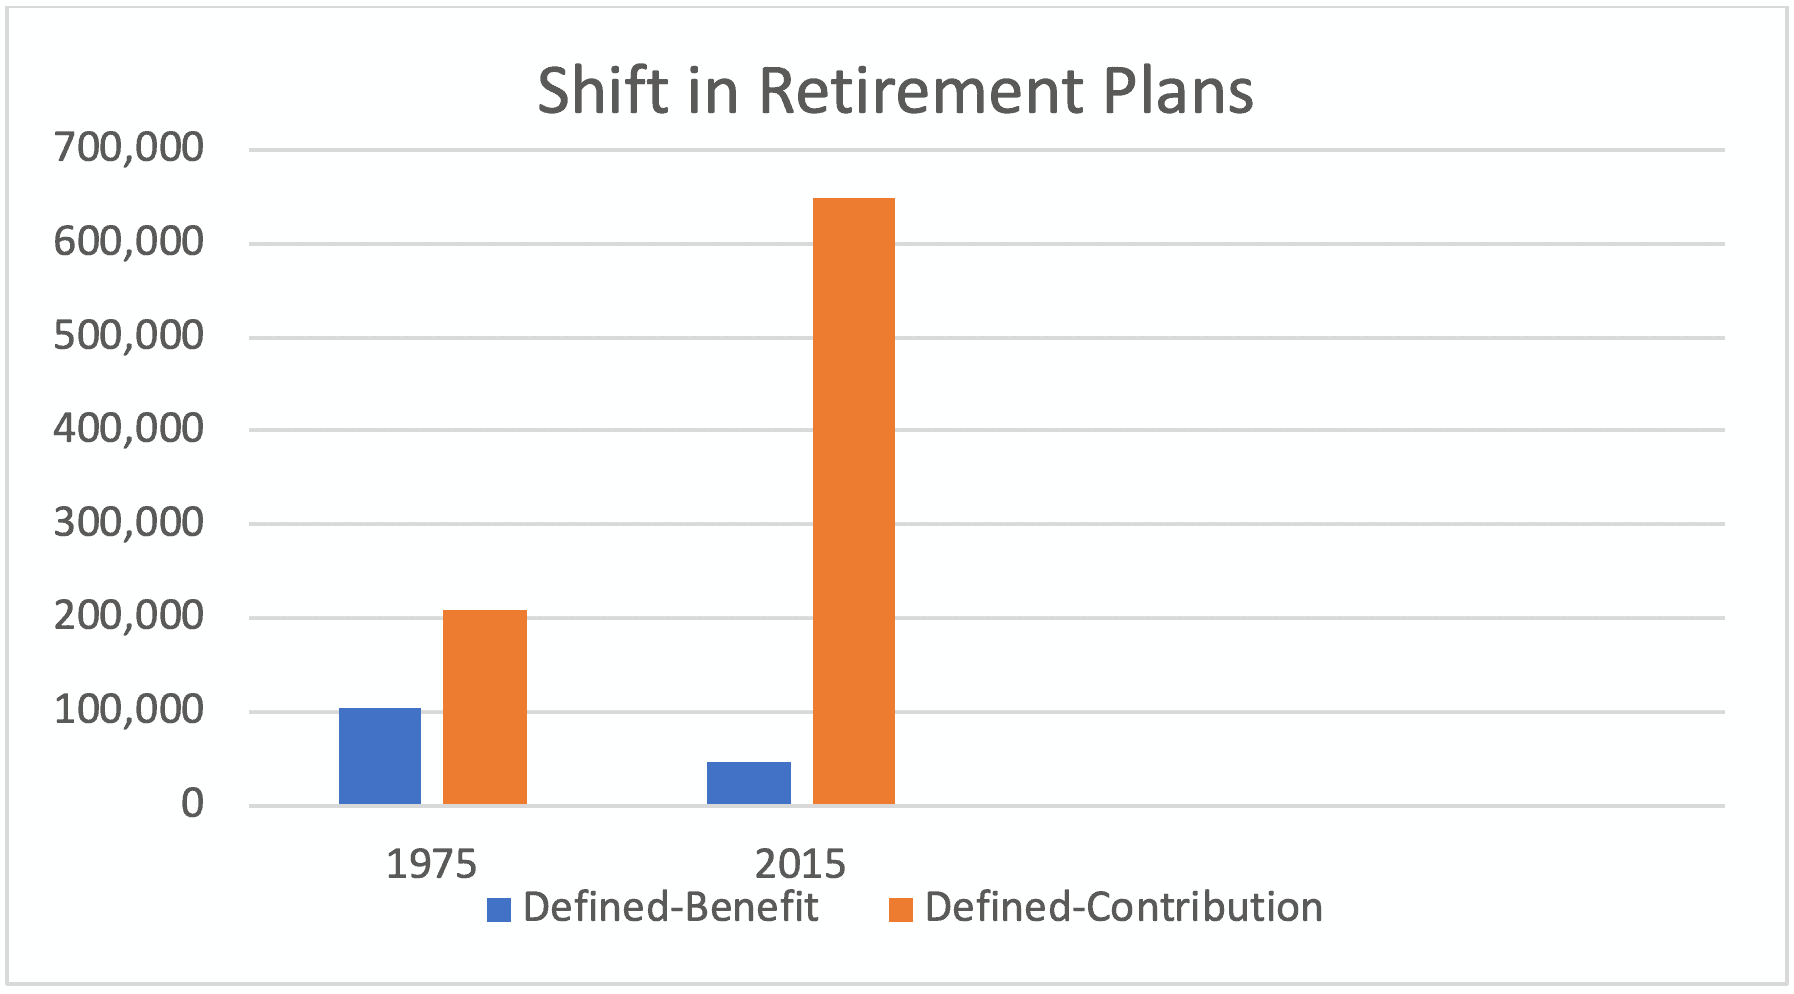 the shift in retirement plans